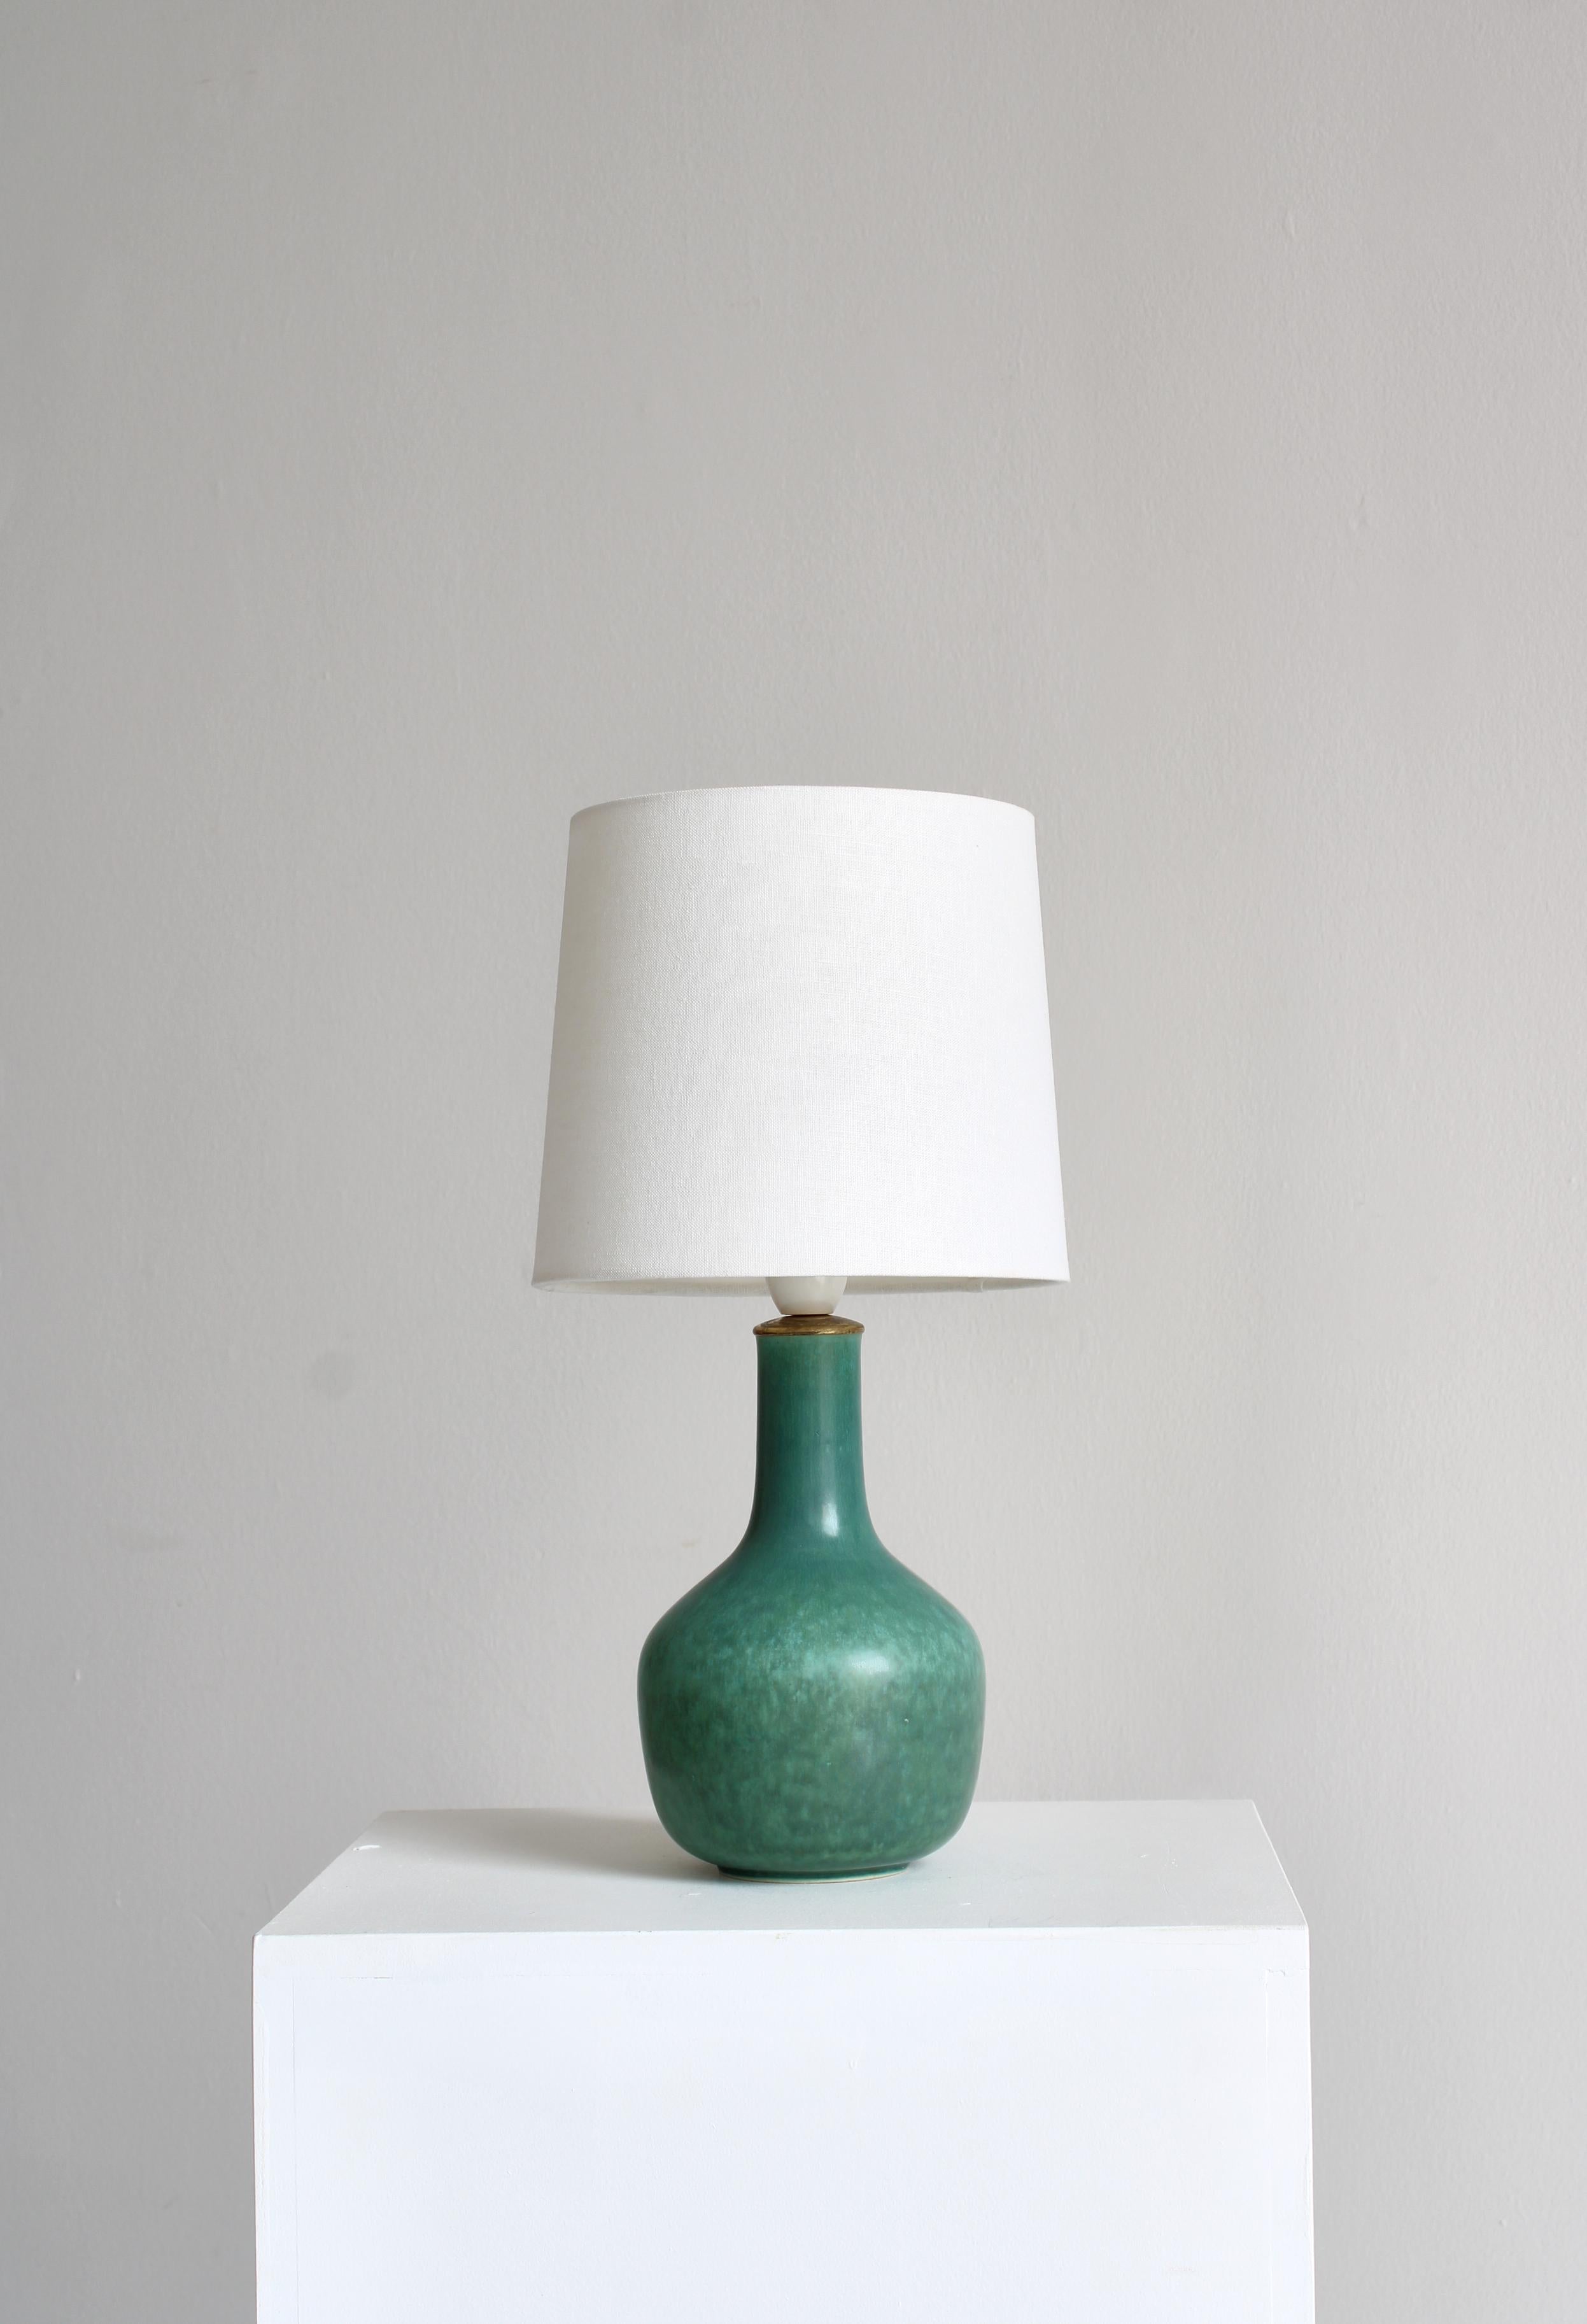 Rare stoneware table lamp model 469 by Saxbo Pottery, Denmark. Made by Eva Staehr-Nielsen in the 1940s and decorated in a wonderful green haresfur glazing. Original brass and bakelite mount. Signed 